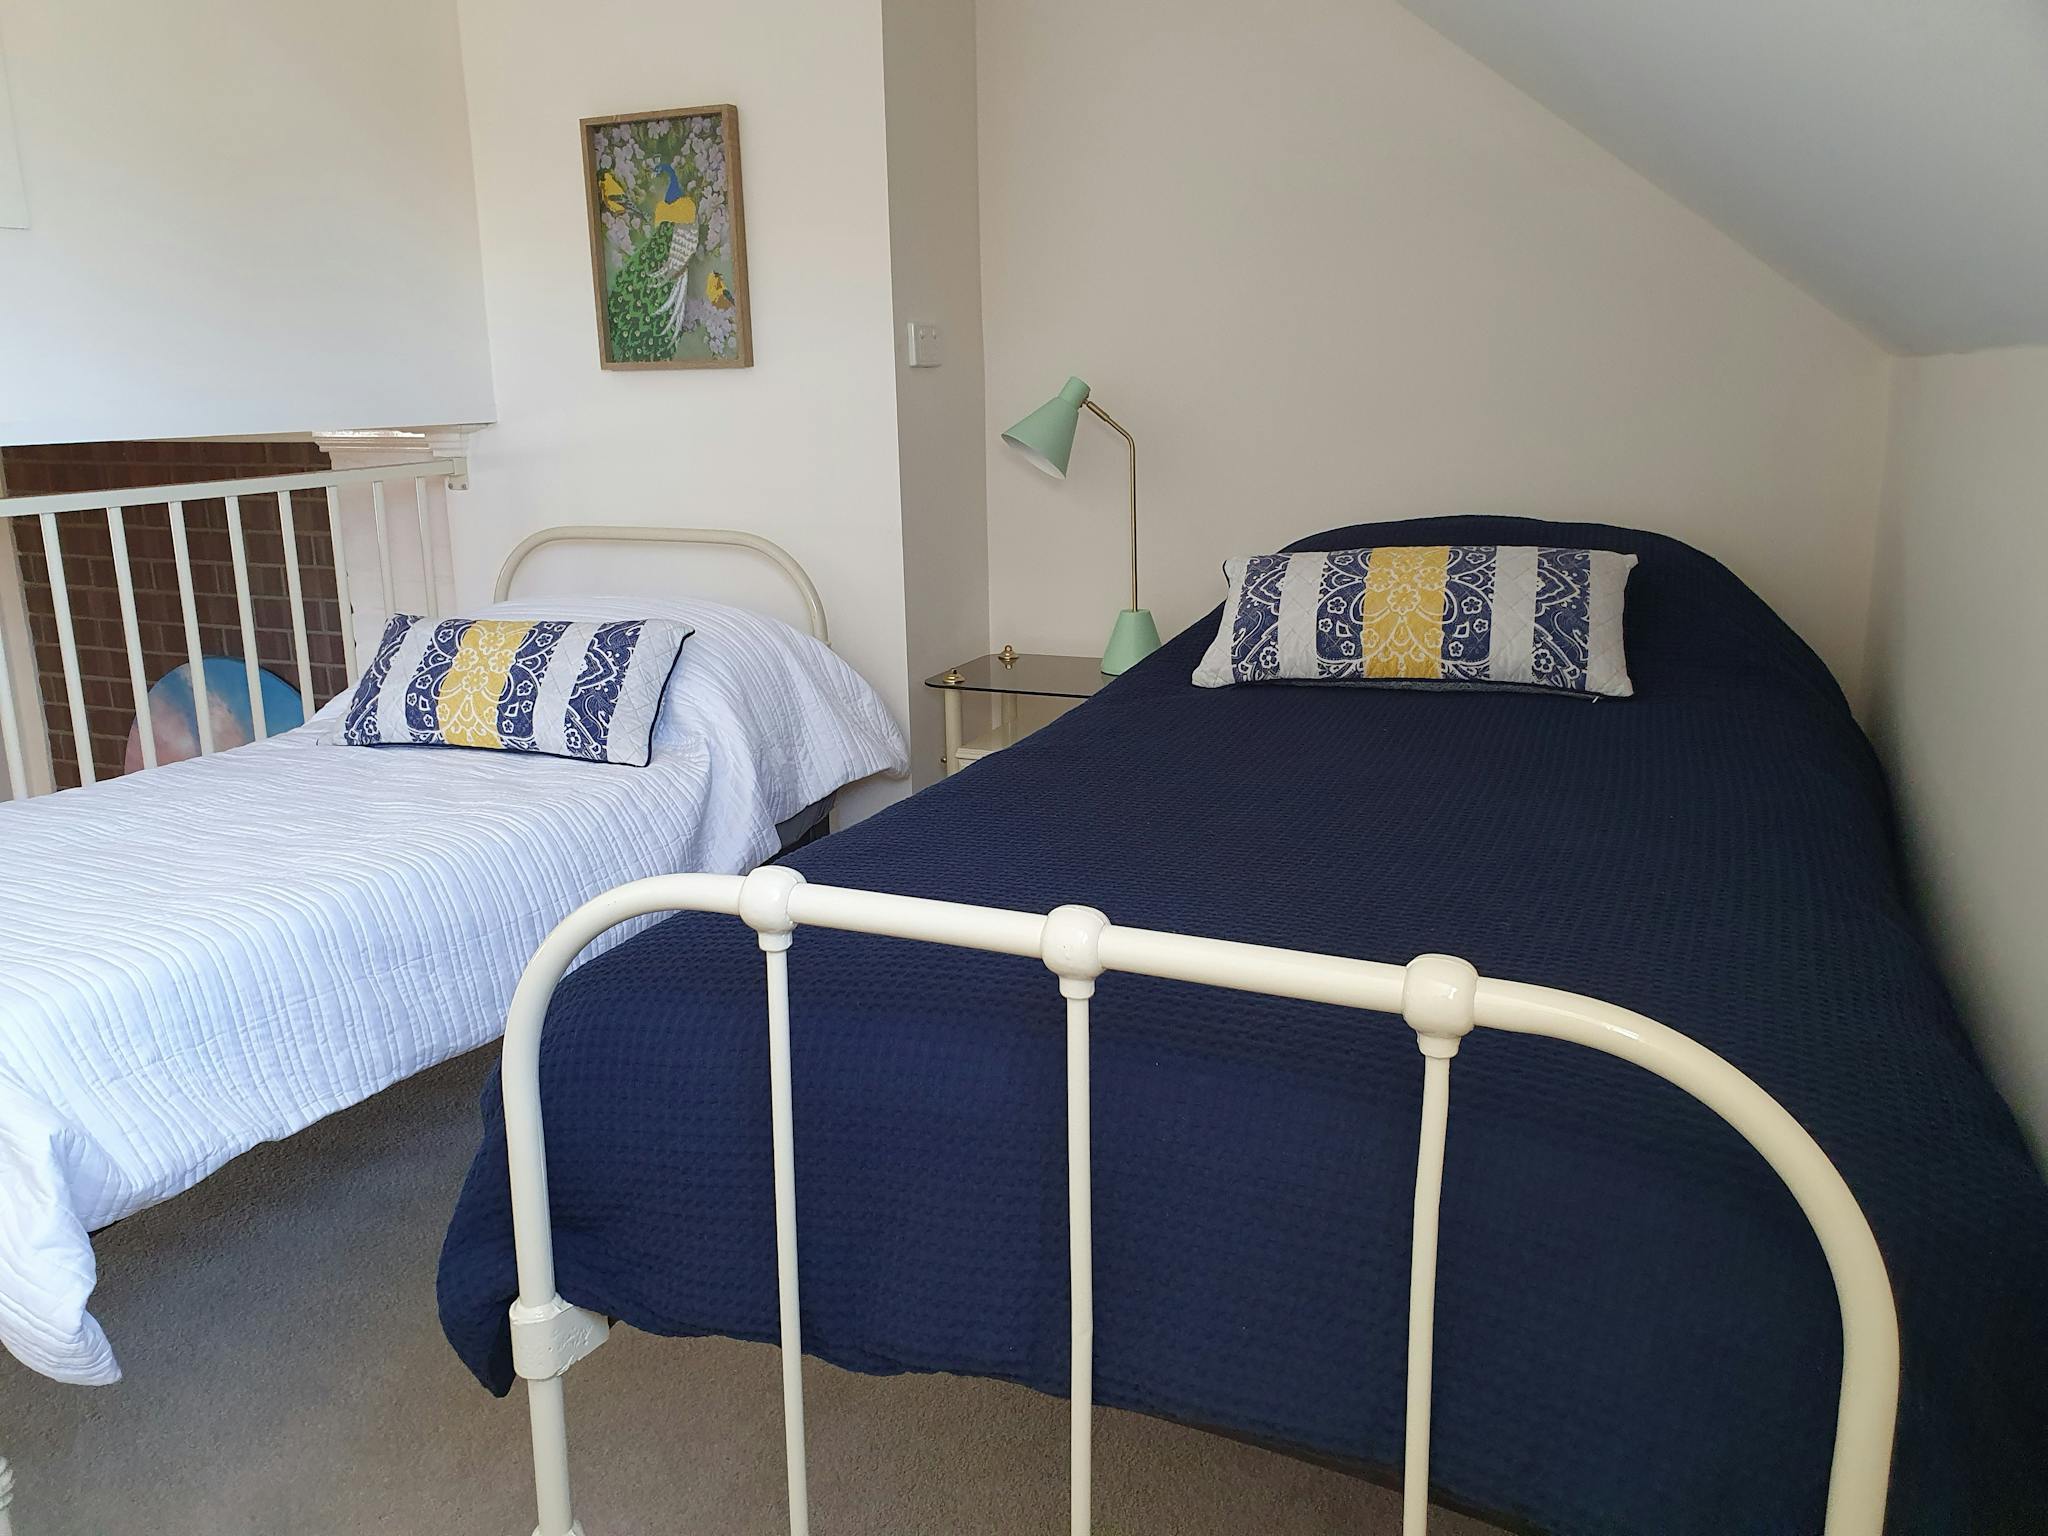 Two single beds beautifully made with blue covers and pillows in a upstairs bedroom.